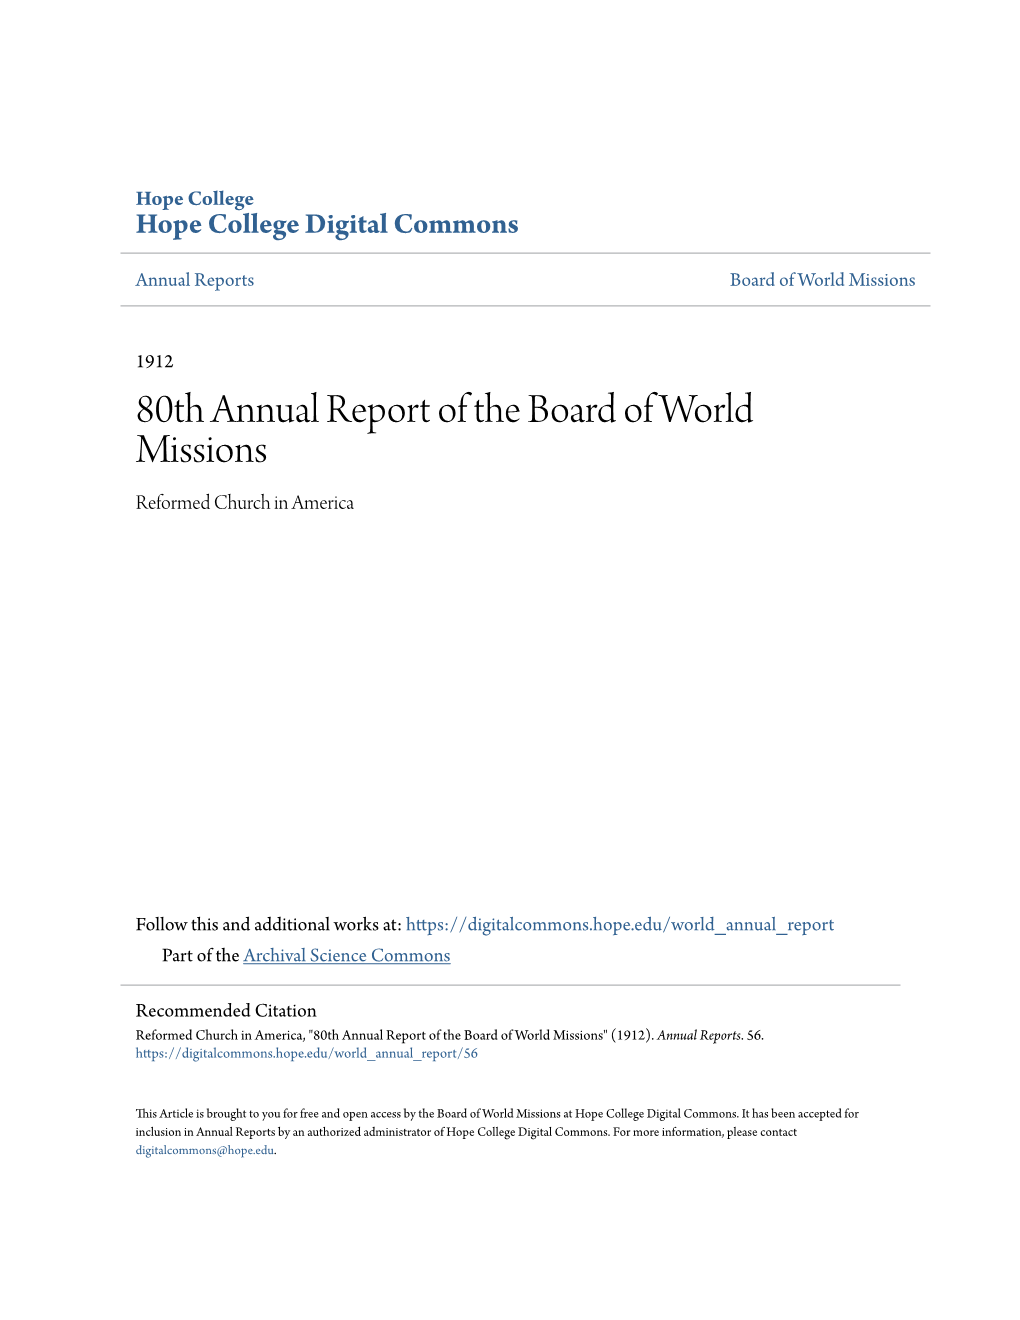 80Th Annual Report of the Board of World Missions Reformed Church in America